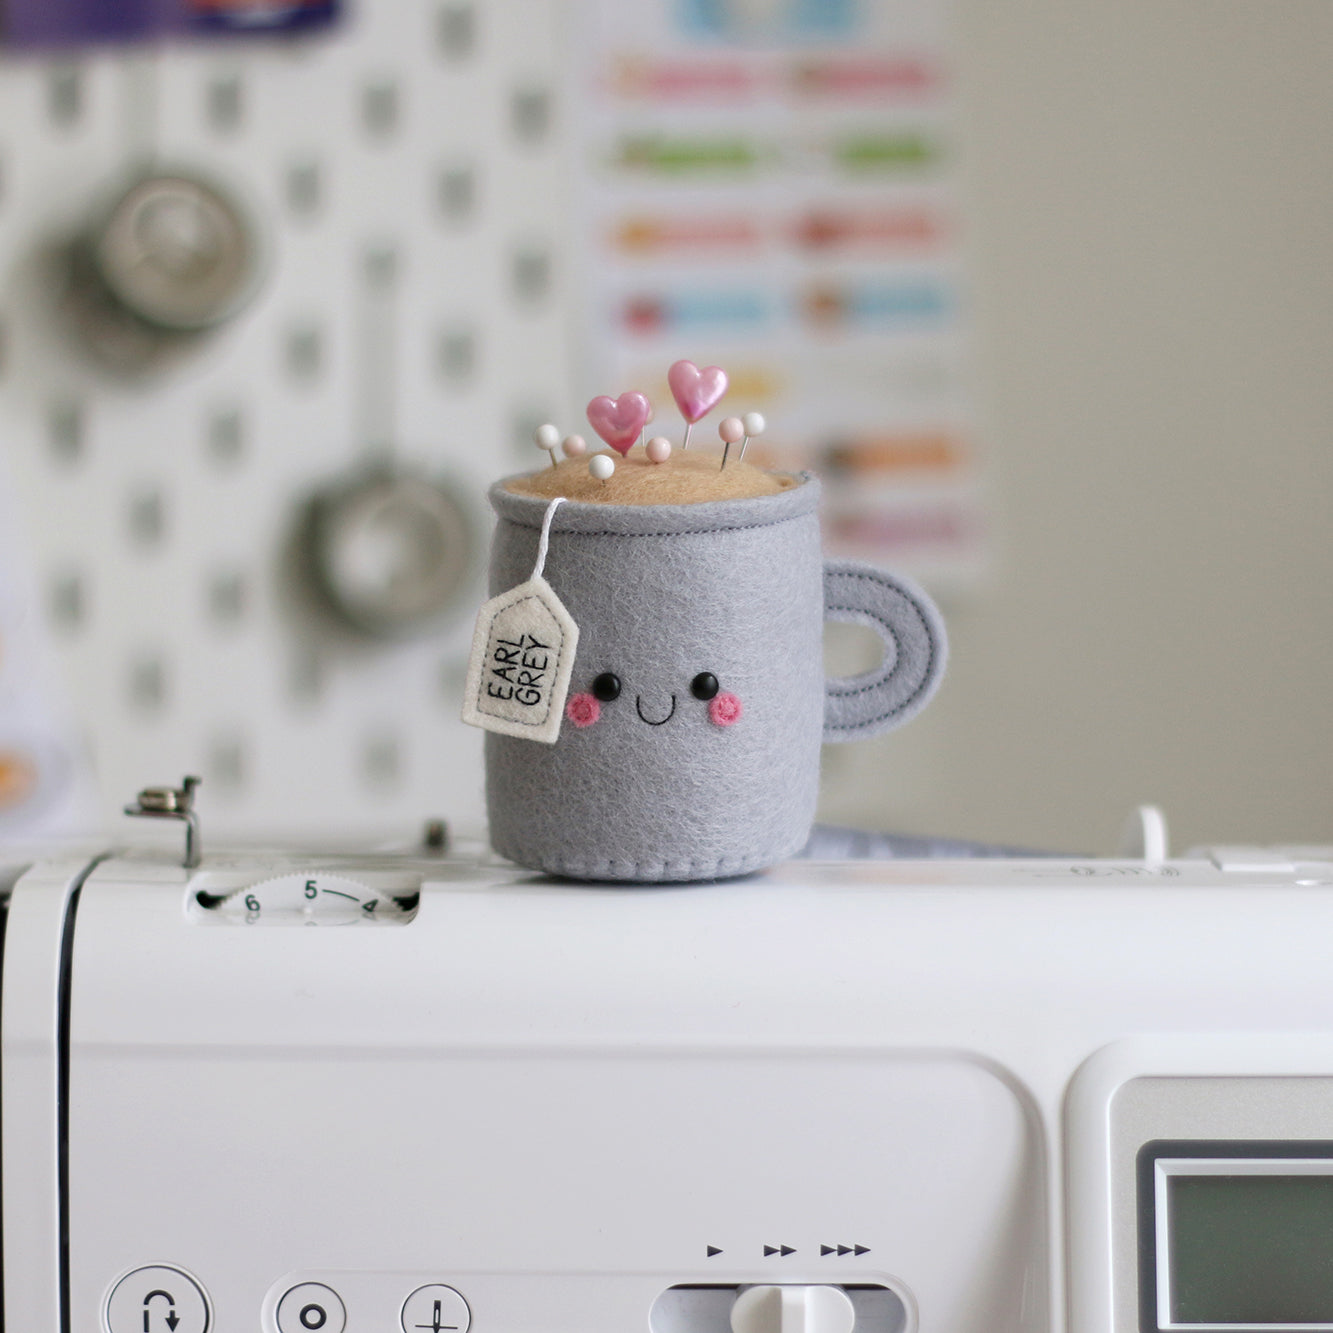 Earl Grey Teacup Pincushion by hannahdoodle on sewing machine